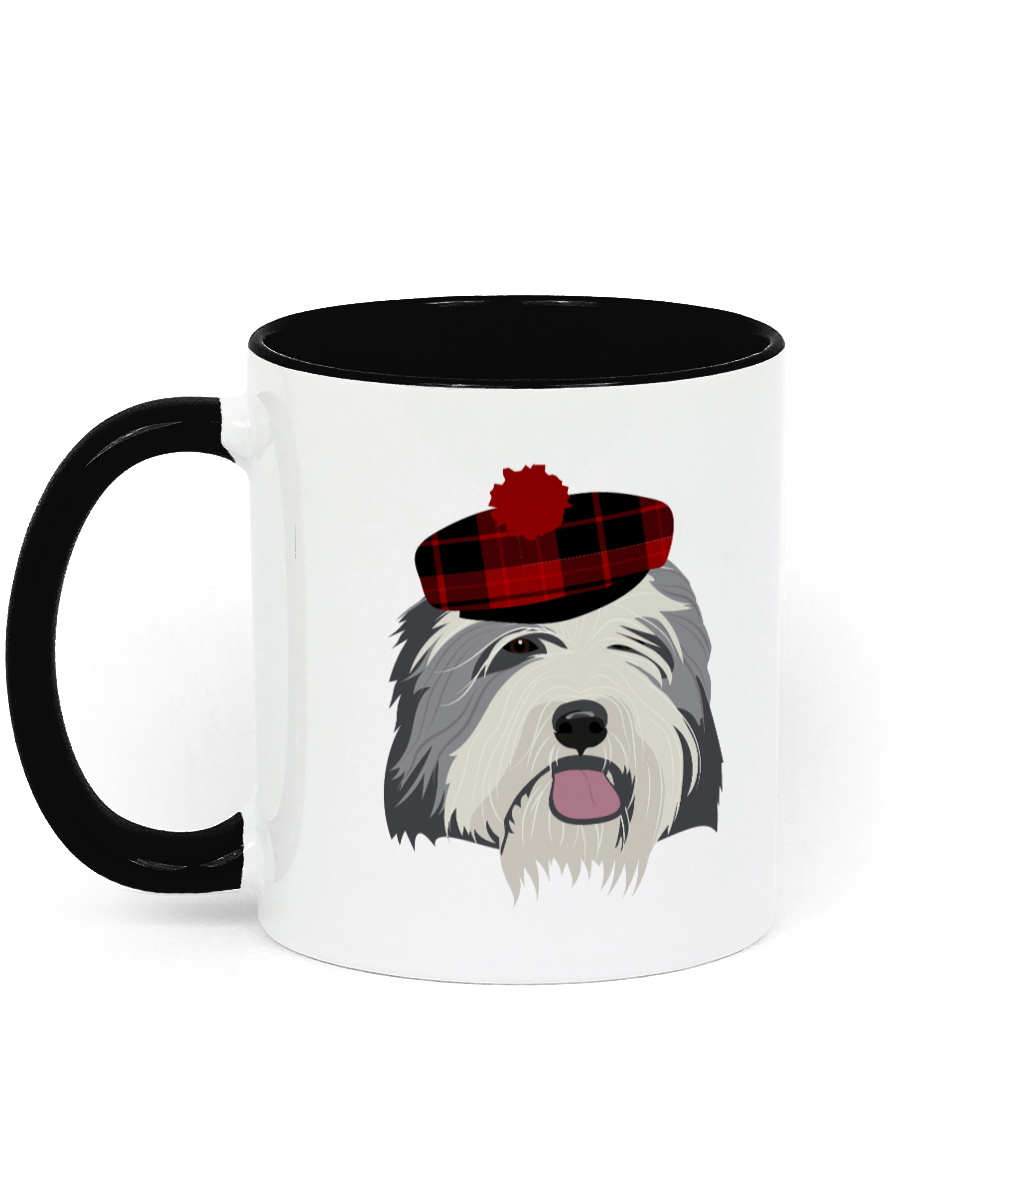 Two Toned Ceramic Mug featuring a Bearded Collie